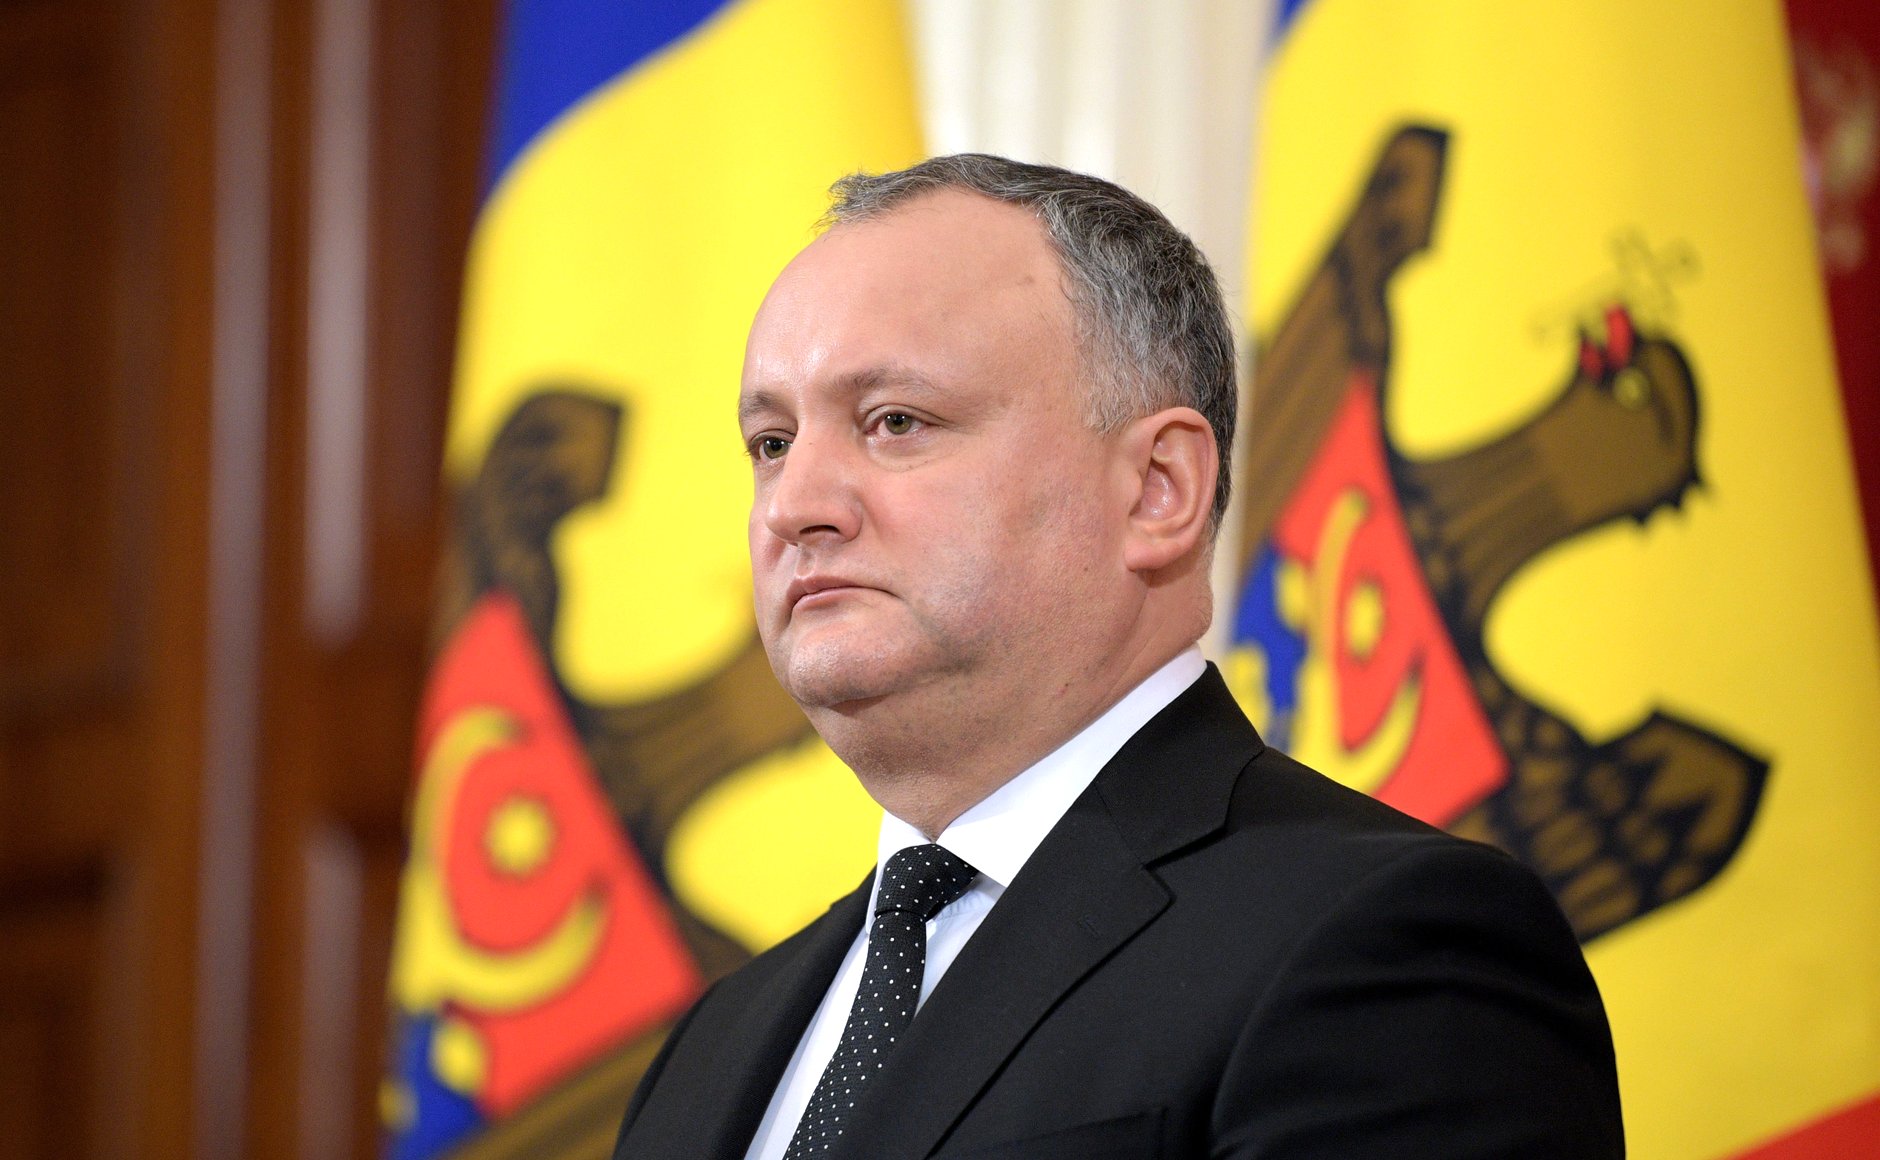 Moldova's pro-Russian former president Dodon detained, says he is innocent